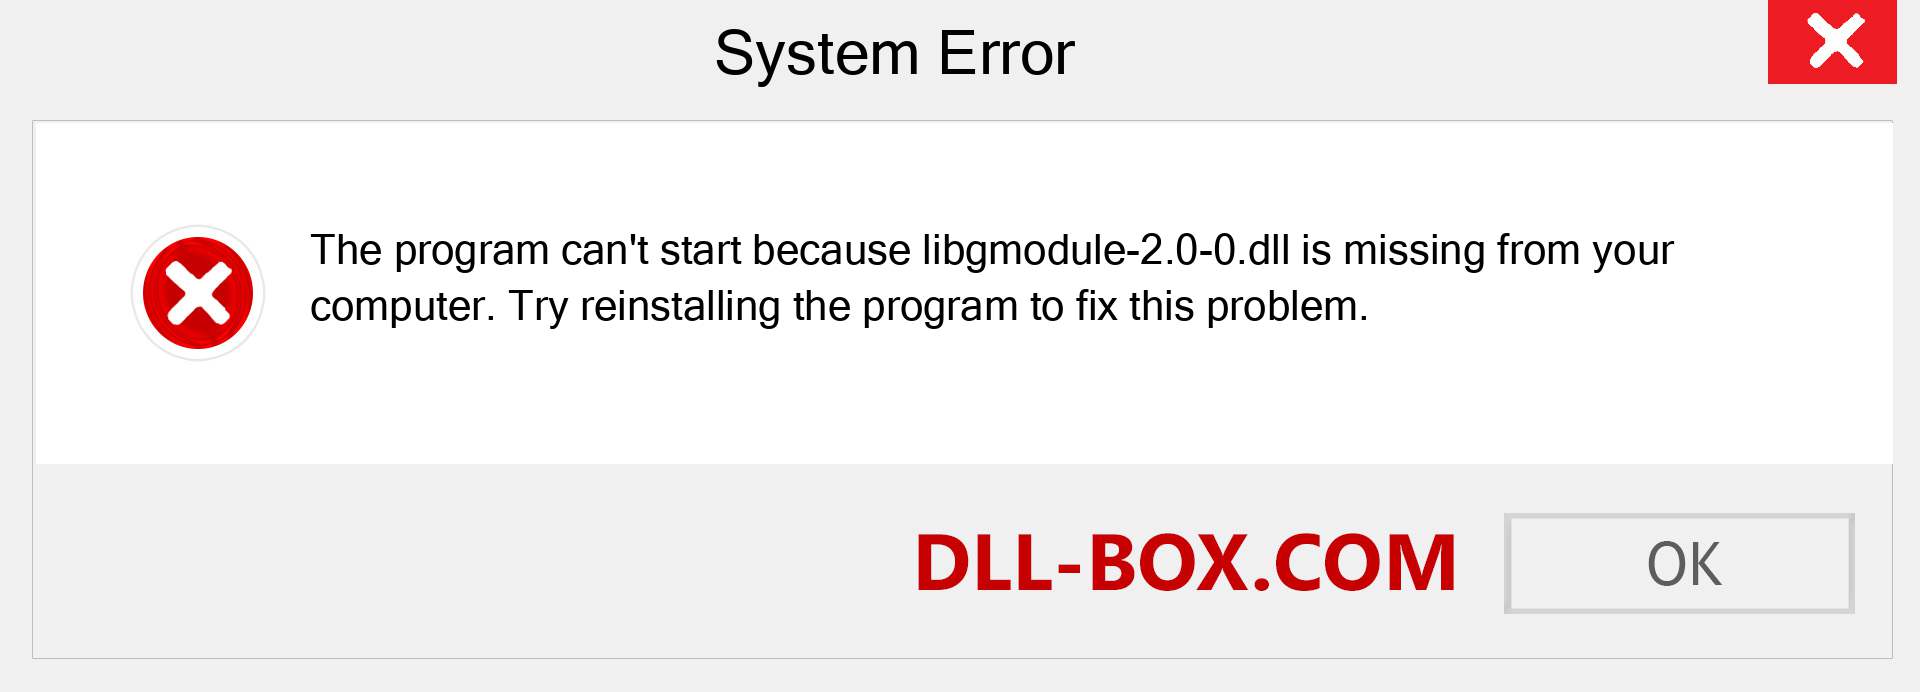  libgmodule-2.0-0.dll file is missing?. Download for Windows 7, 8, 10 - Fix  libgmodule-2.0-0 dll Missing Error on Windows, photos, images